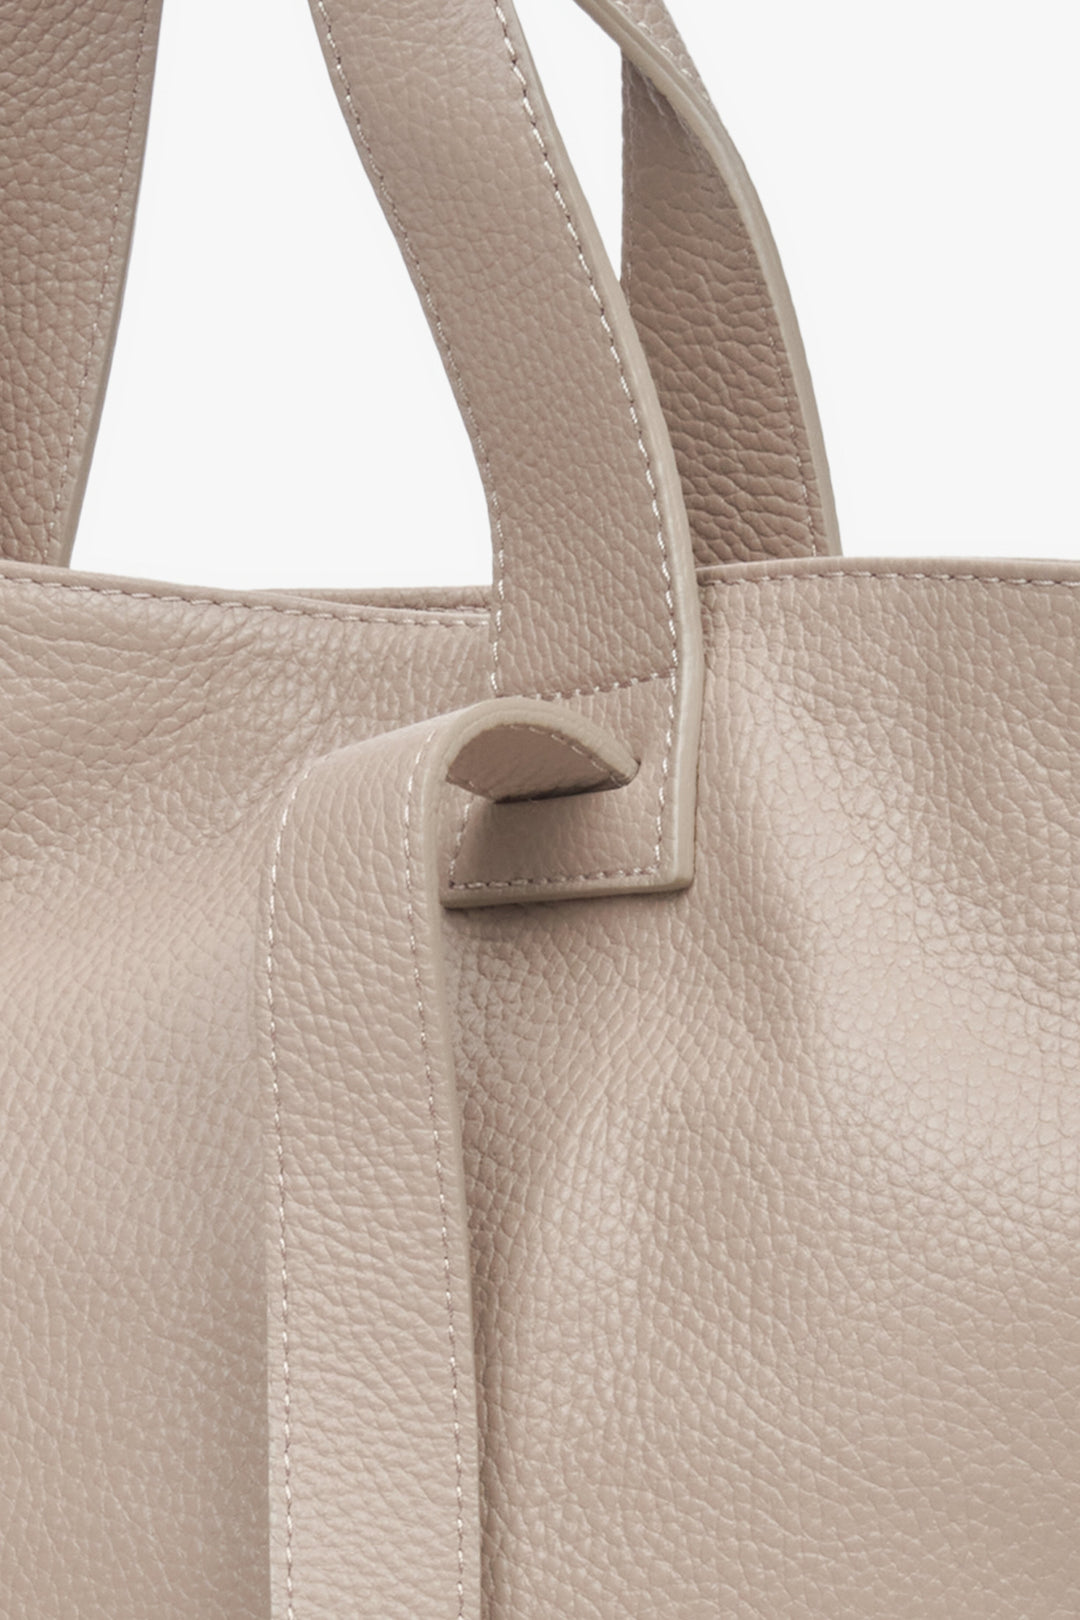 Women's leather large handbag in beige by Estro - close-up on the details